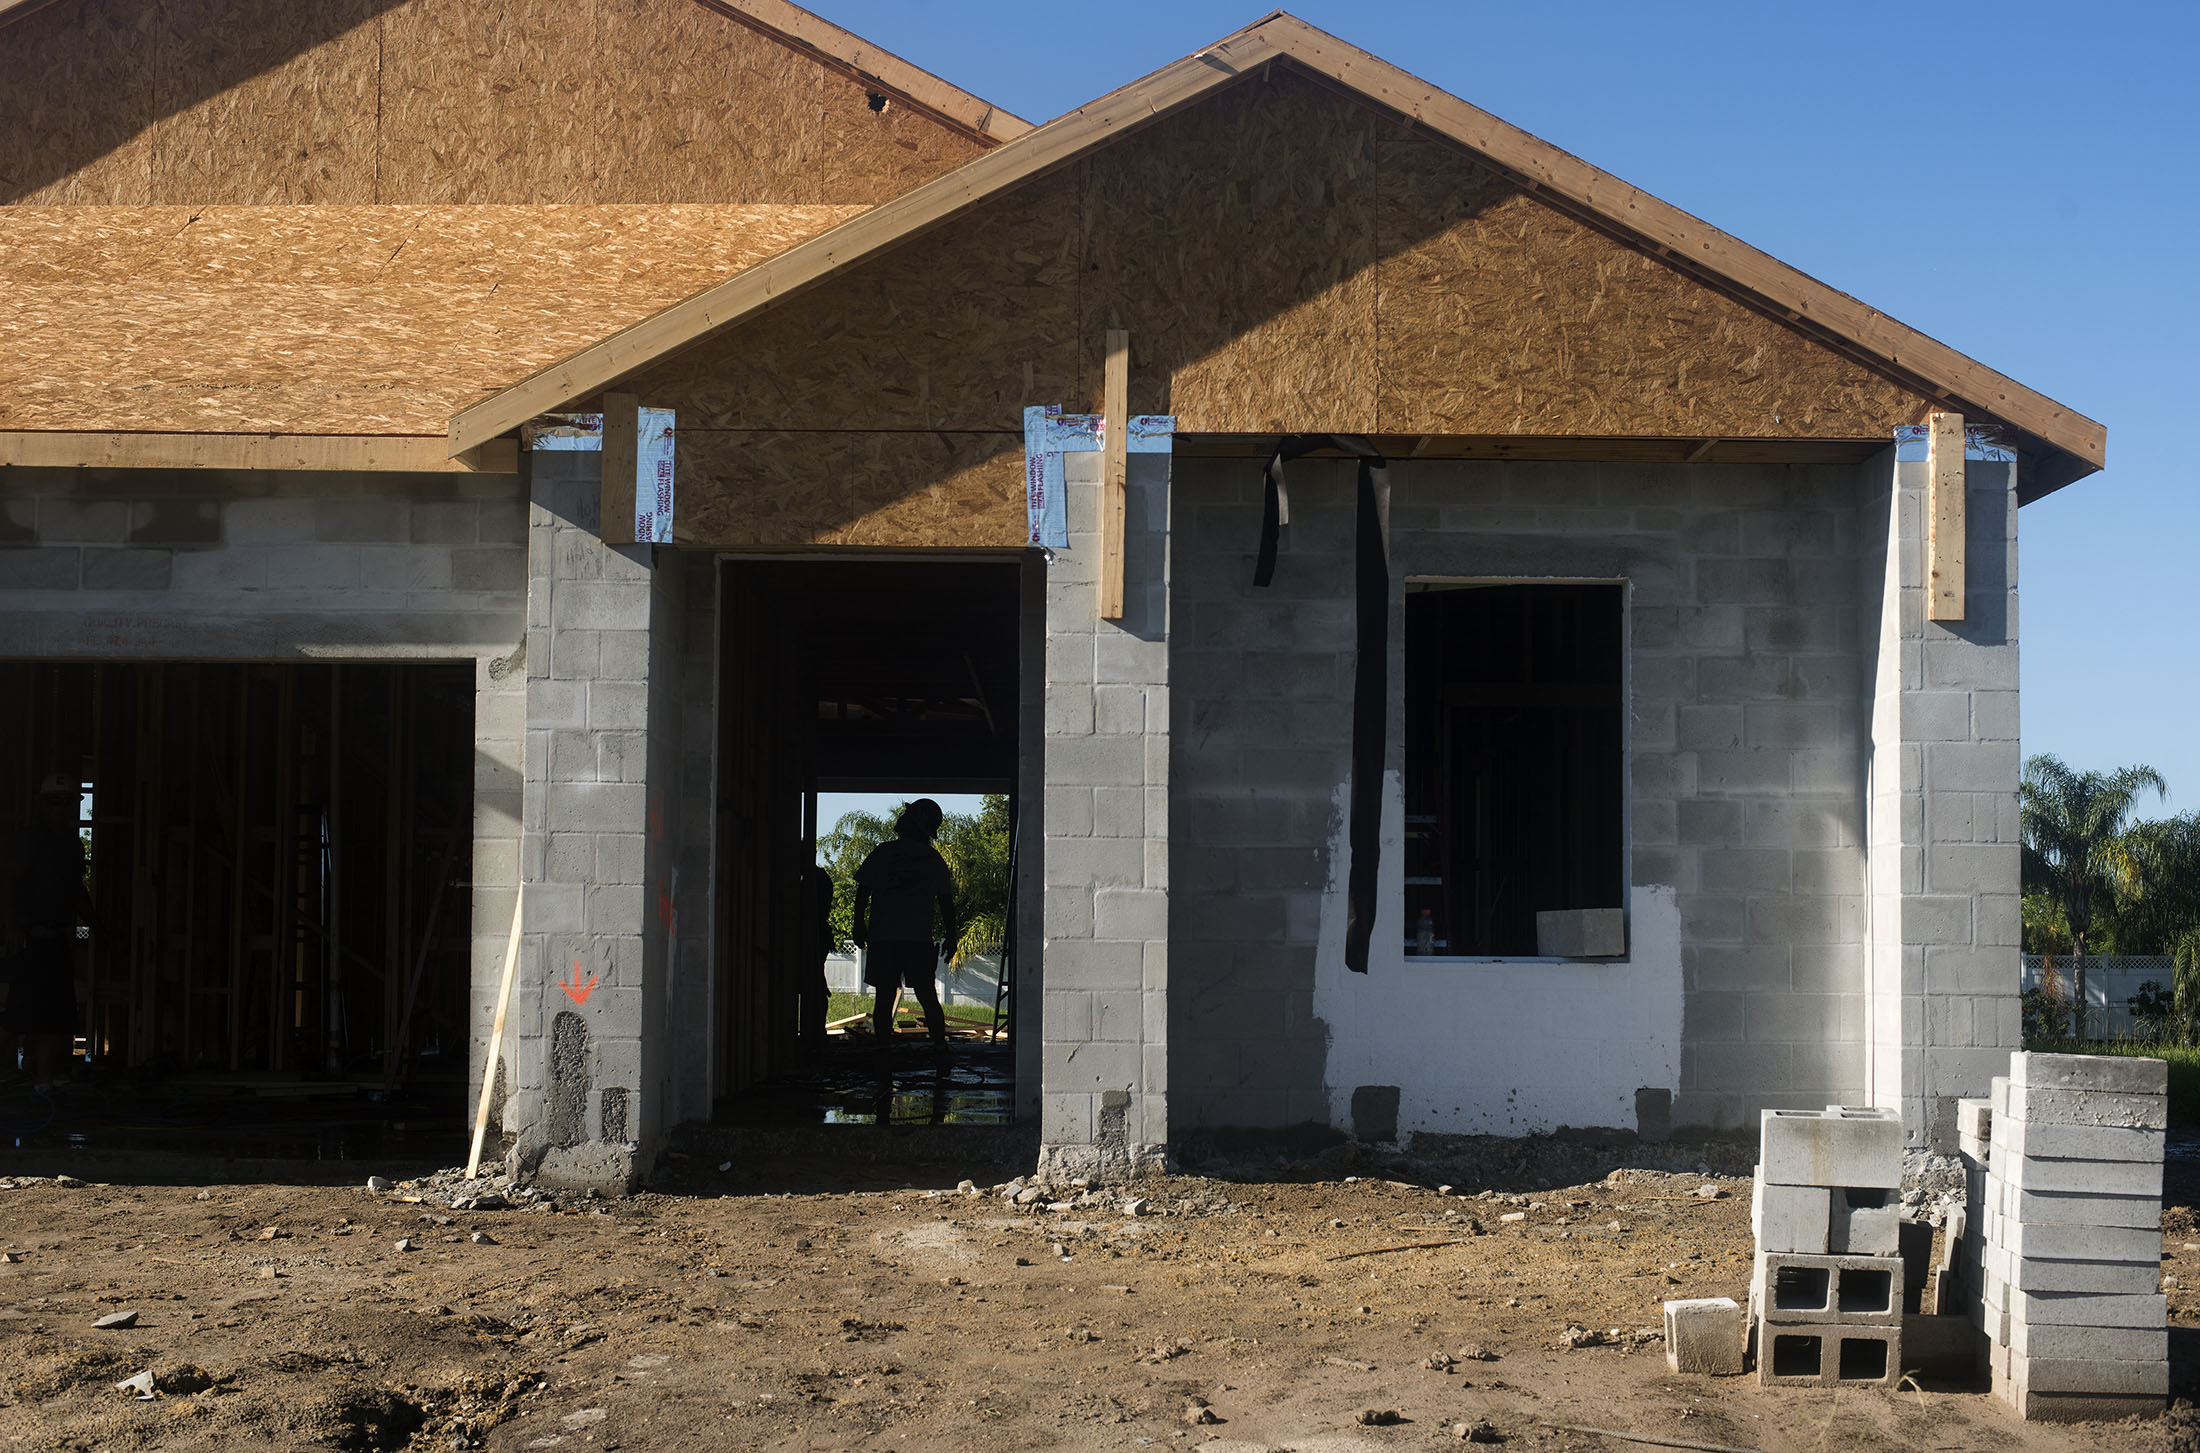 The silhouette of a worker is seen inside a home under construction at the M/I Homes Inc. Bougainvillea Place housing development in Ellenton, Florida, U.S., on Thursday, July 6, 2017. The U.S. Census Bureau is scheduled to release housing starts figures on July 19.